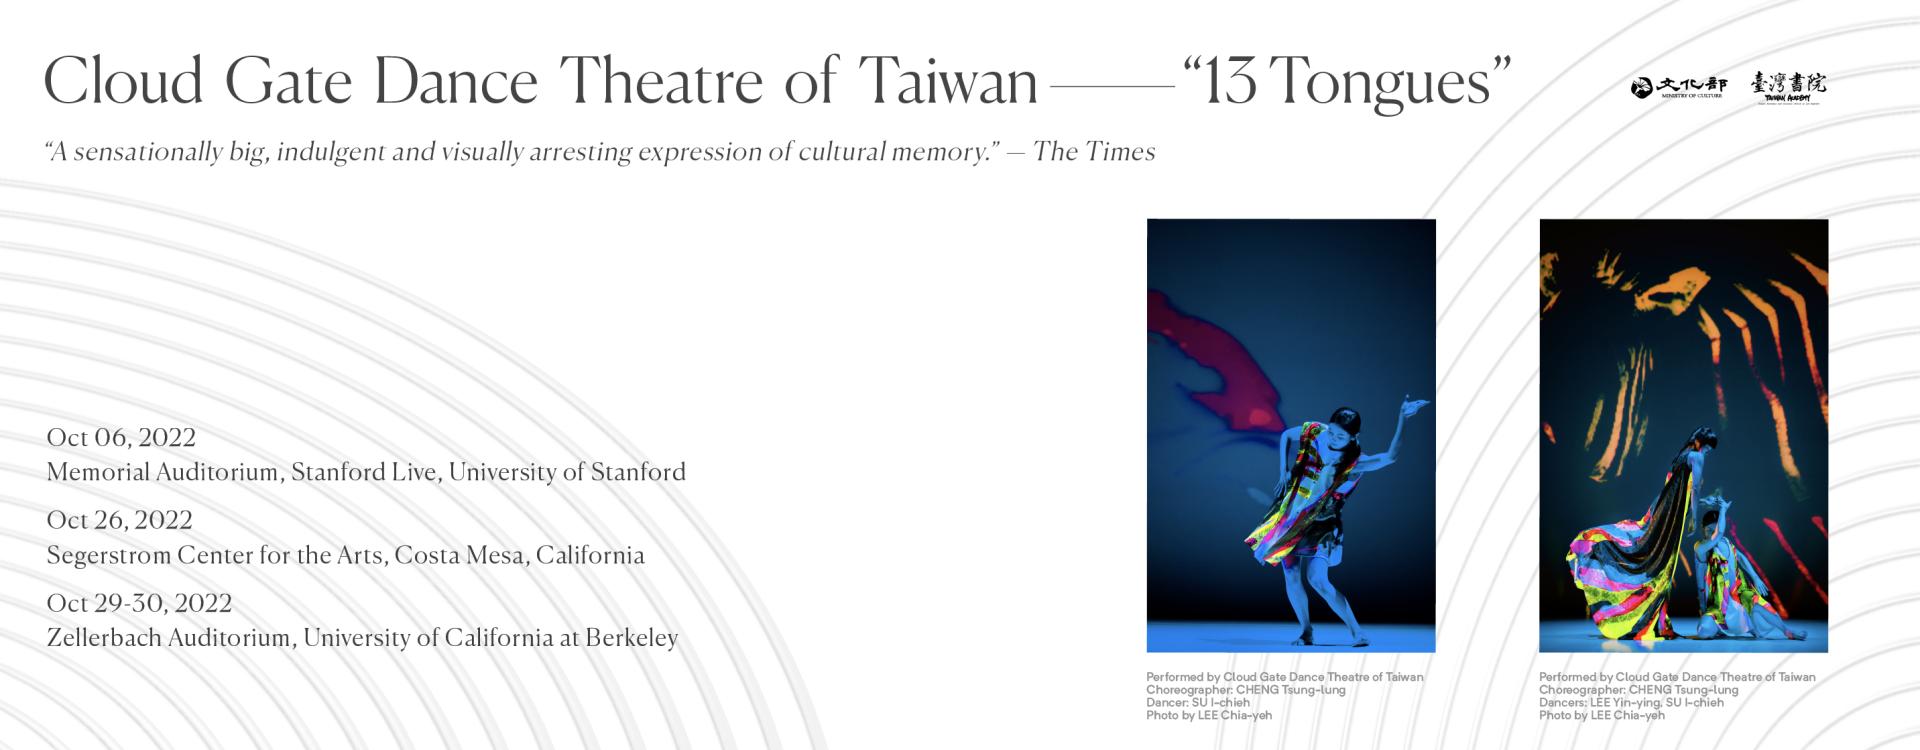 Cloud Gate Dance Theatre of Taiwan Kicks Off “13 Tongues” at 2022 US West Coast Tour in October